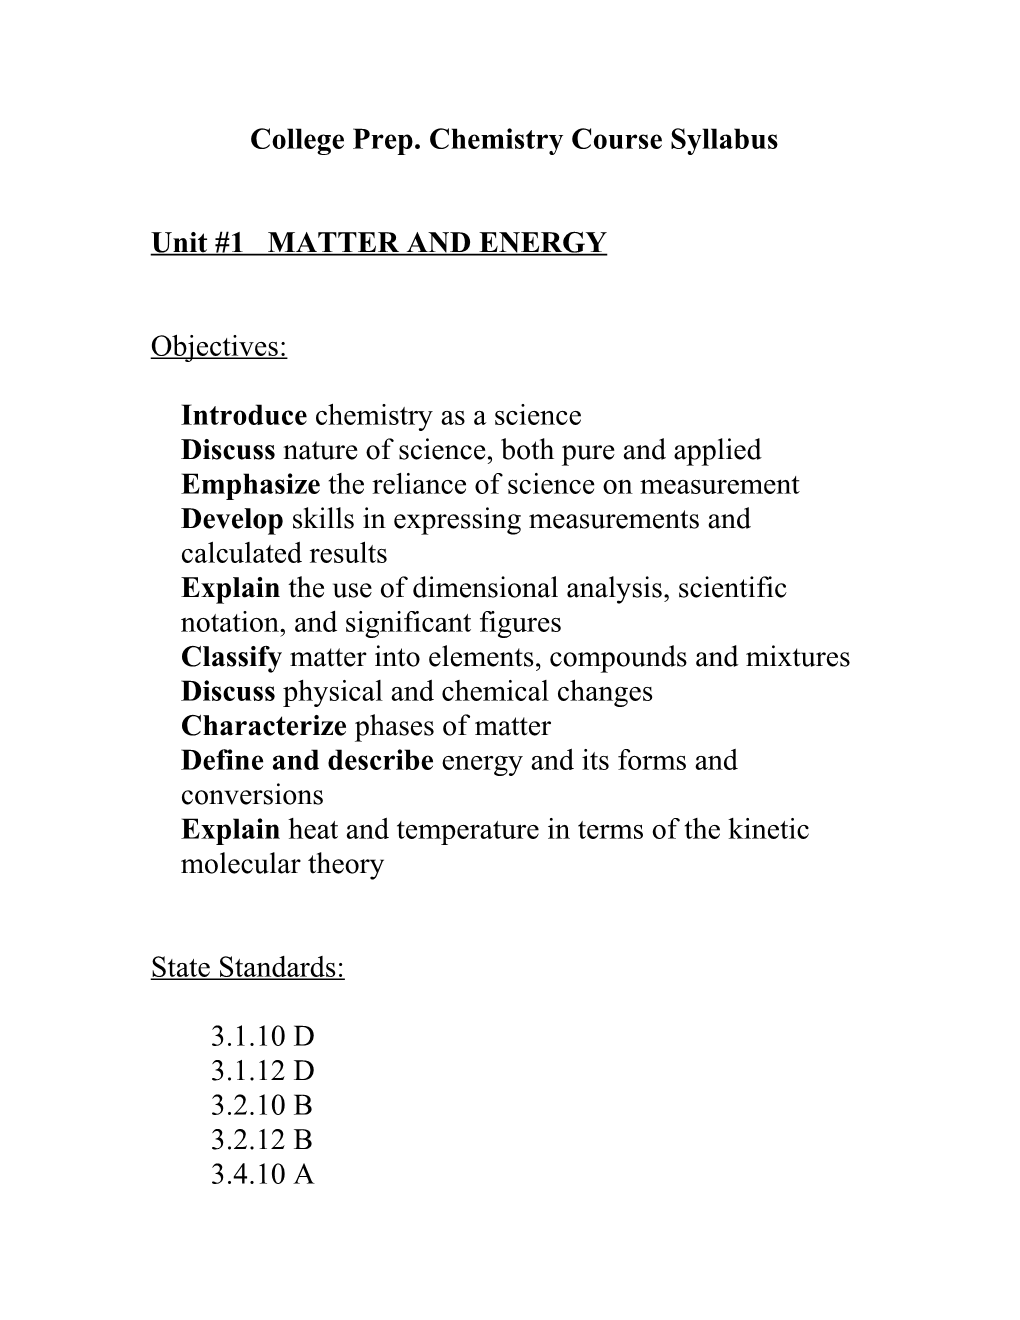 10TH , 11TH Grade Honors Chemistry Course Syllabus